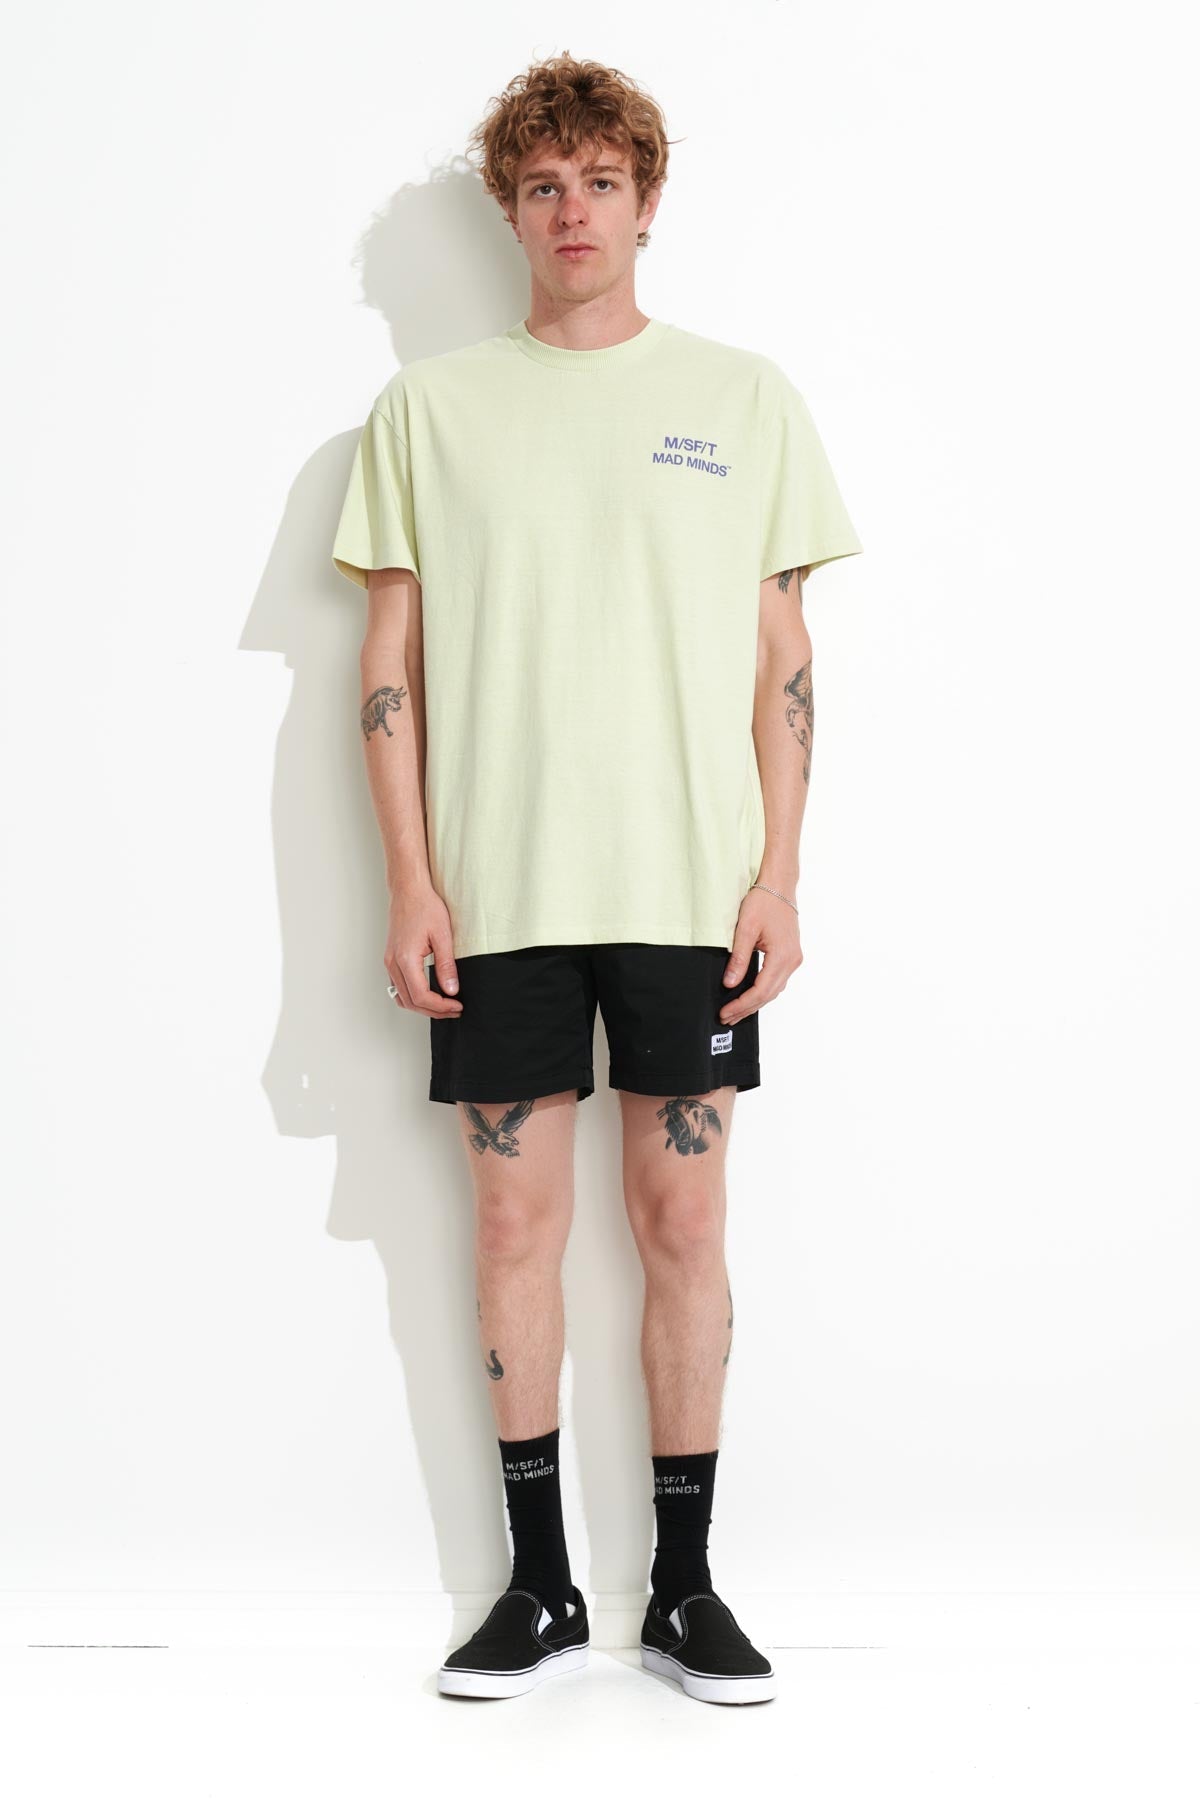 Misfit Shapes - Supercorporate 3.0 SS Tee - Pigment Wasabi